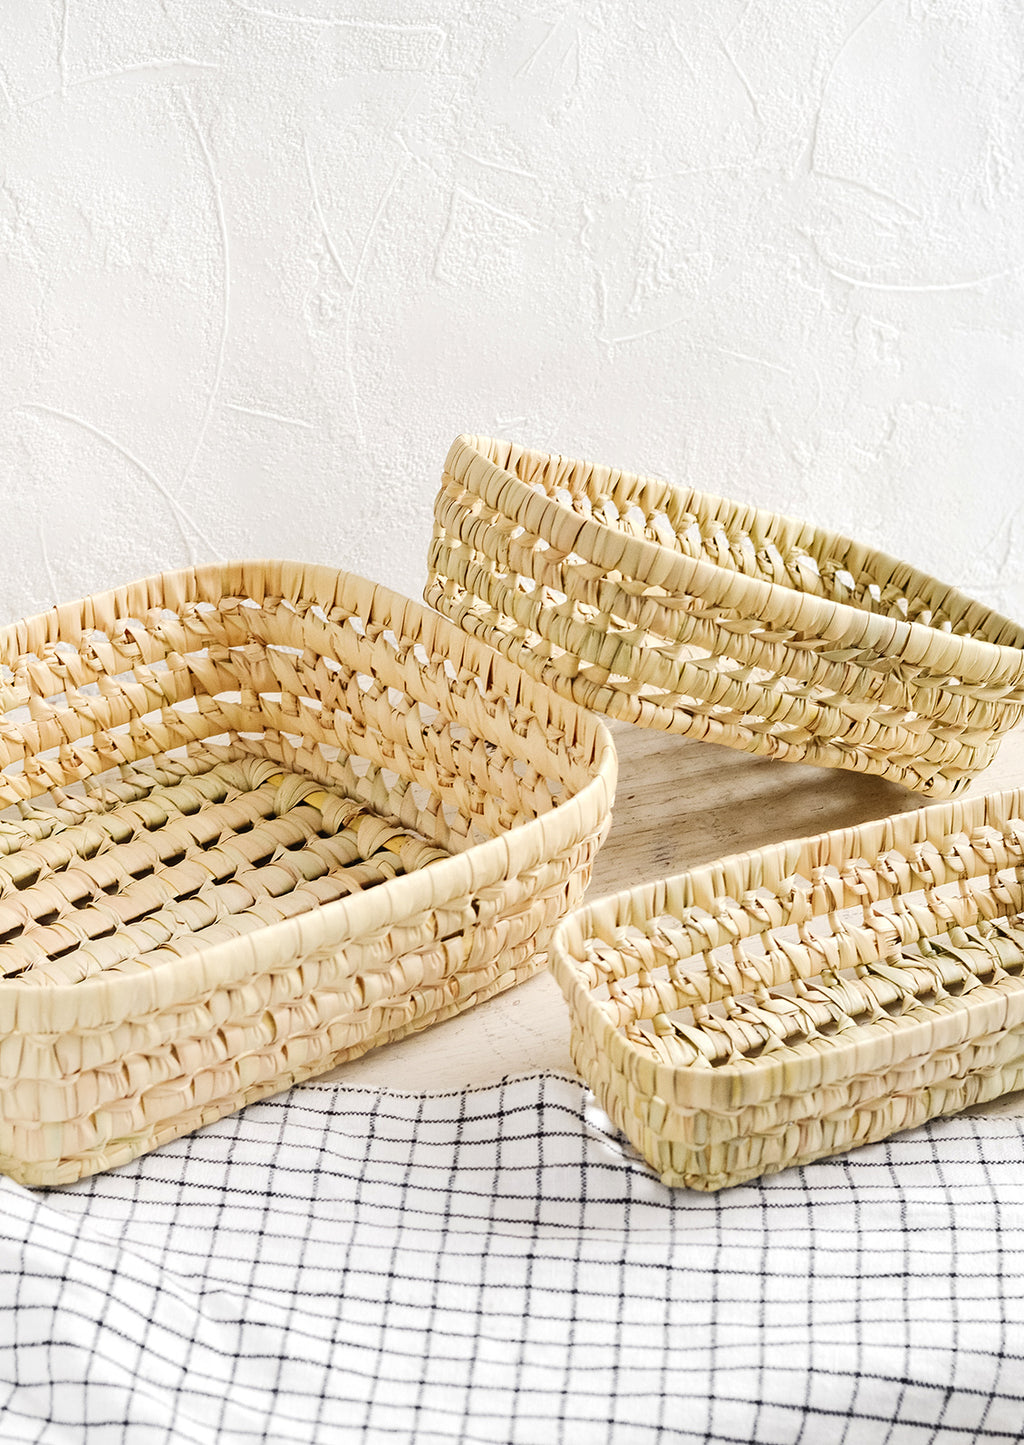 2: Three shallow baskets woven from natural dried palm leaf.